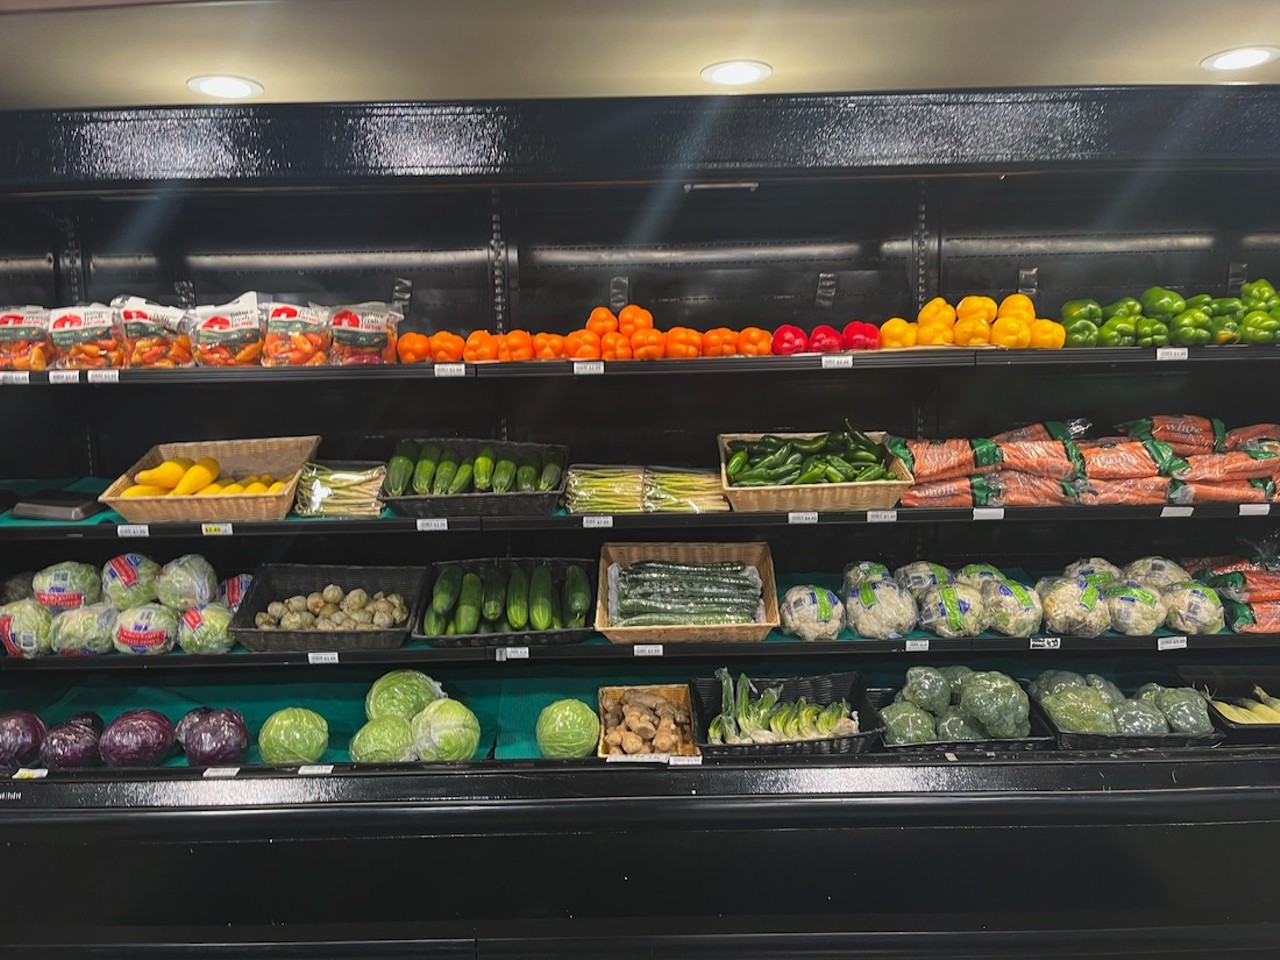 Seriously, not a bad looking produce section downtown!